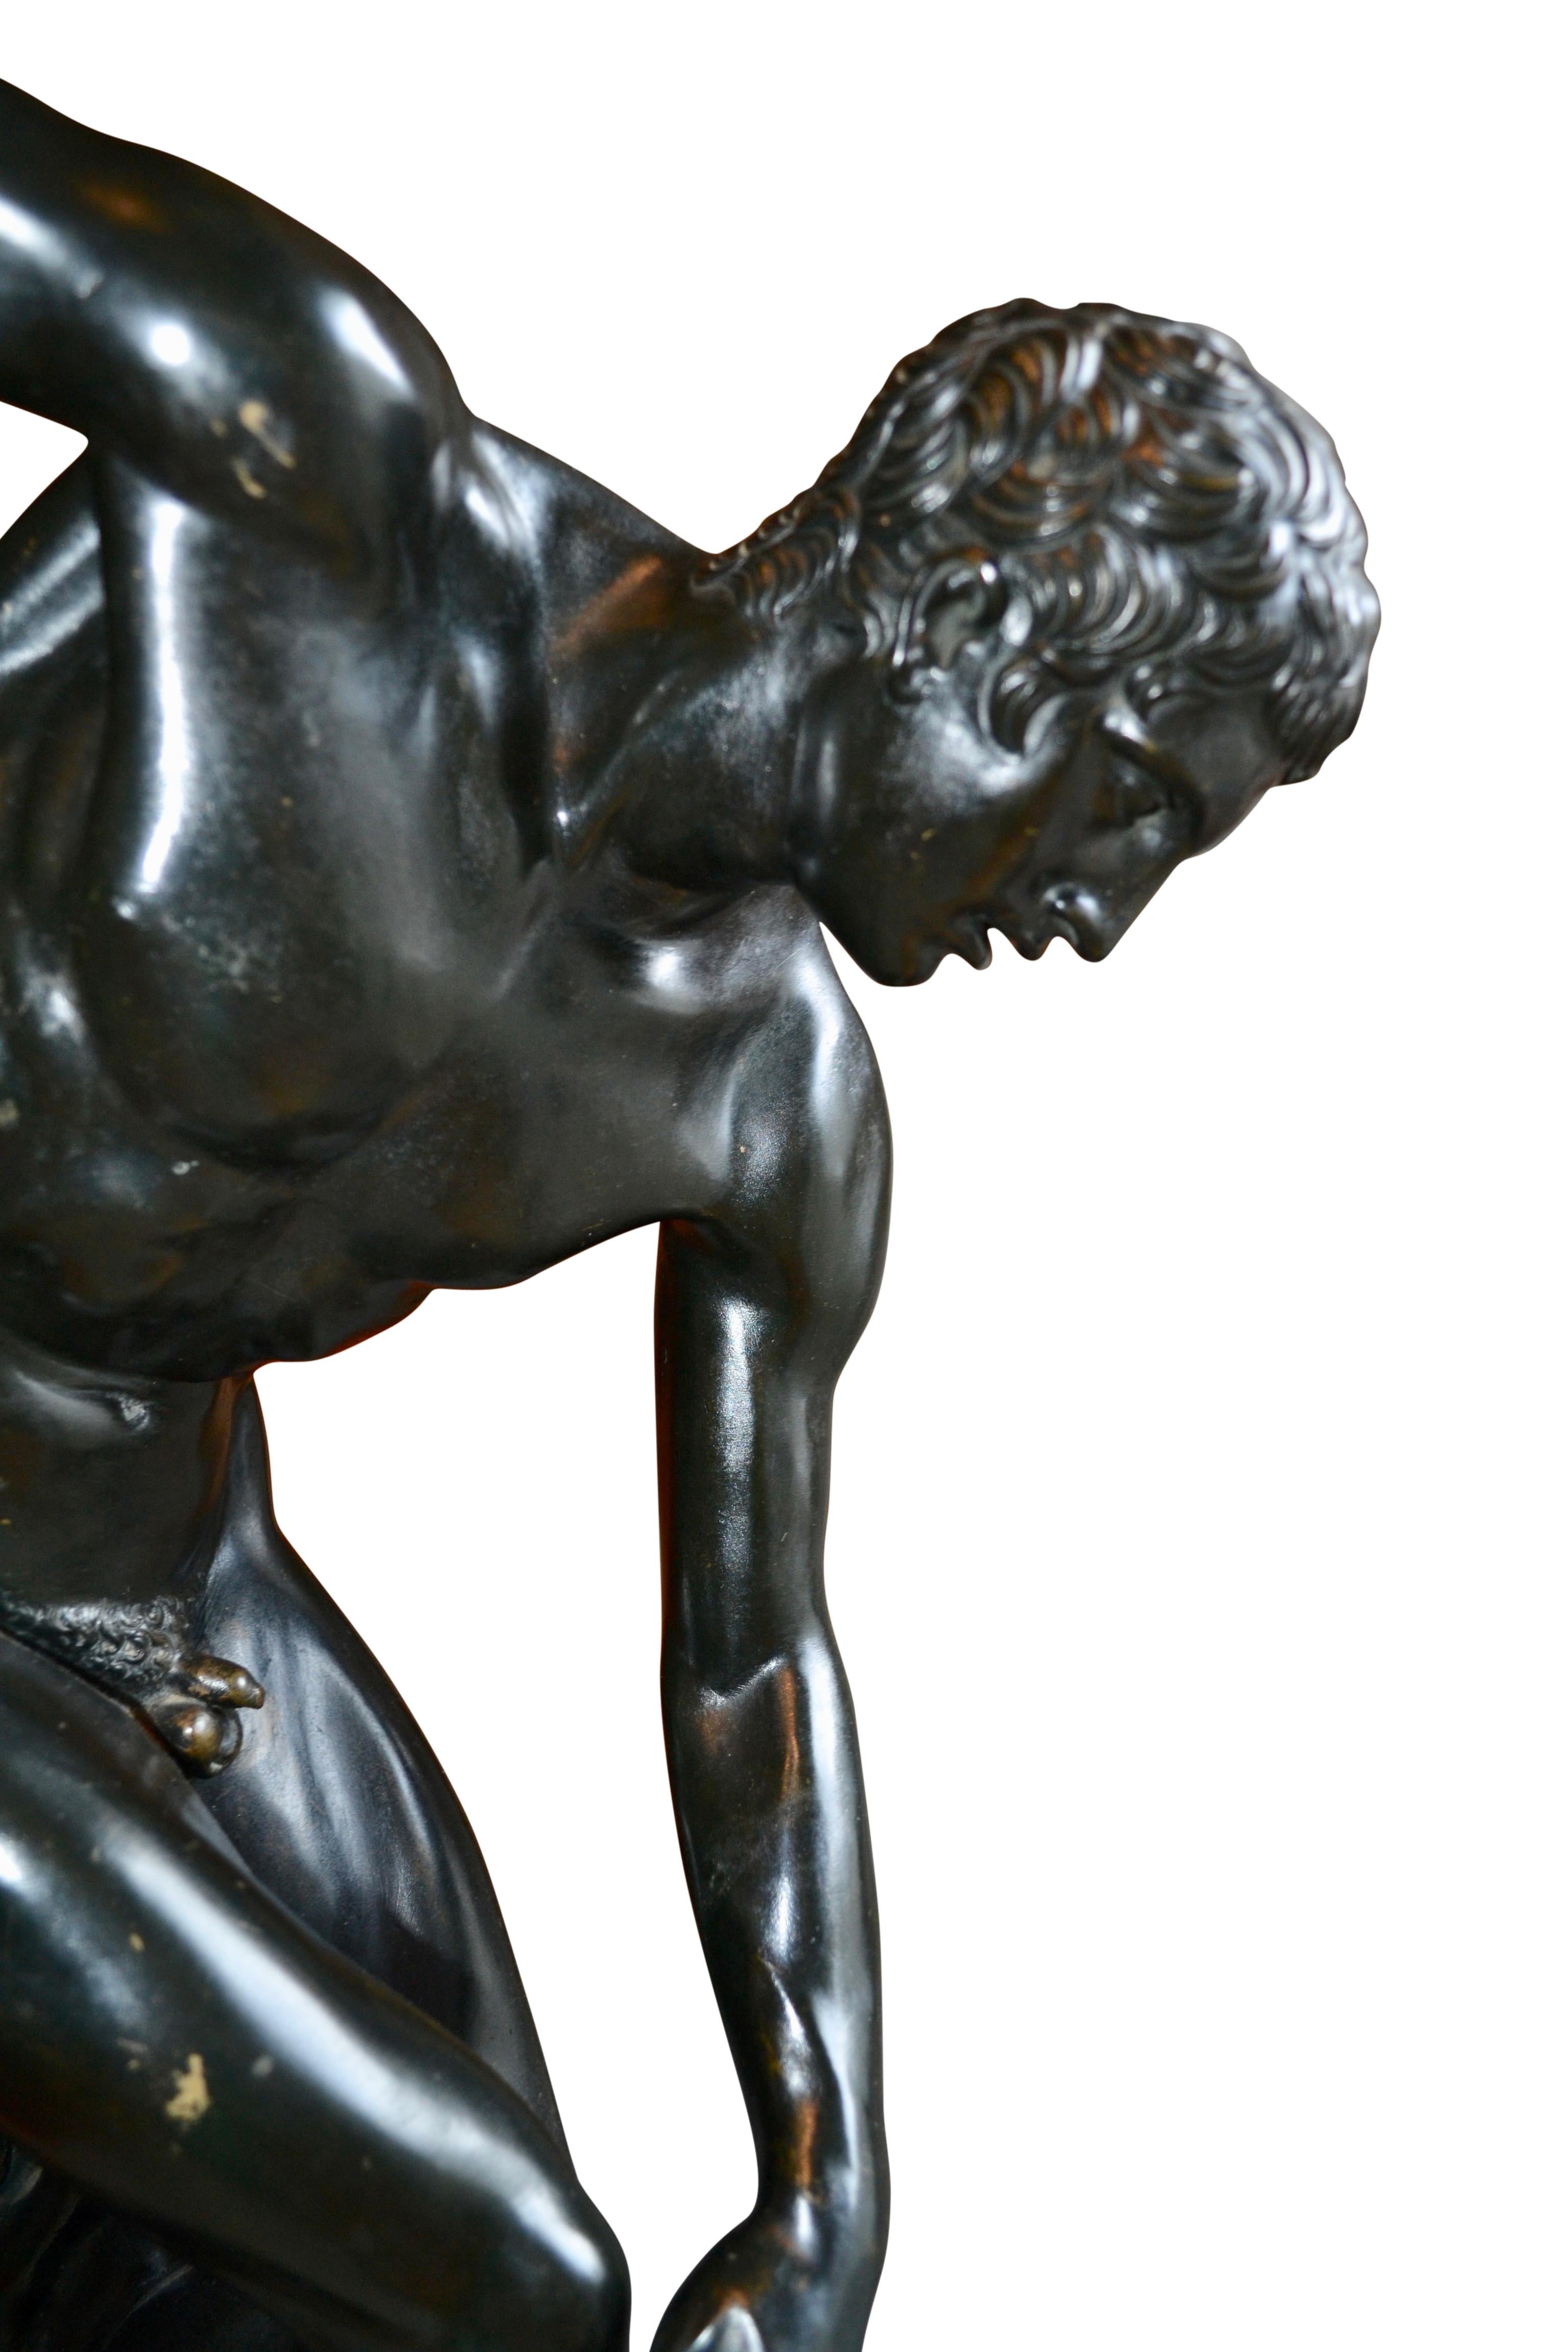 Bronze Statue of a Discus Thrower Known as the Discobolus of Myron 3